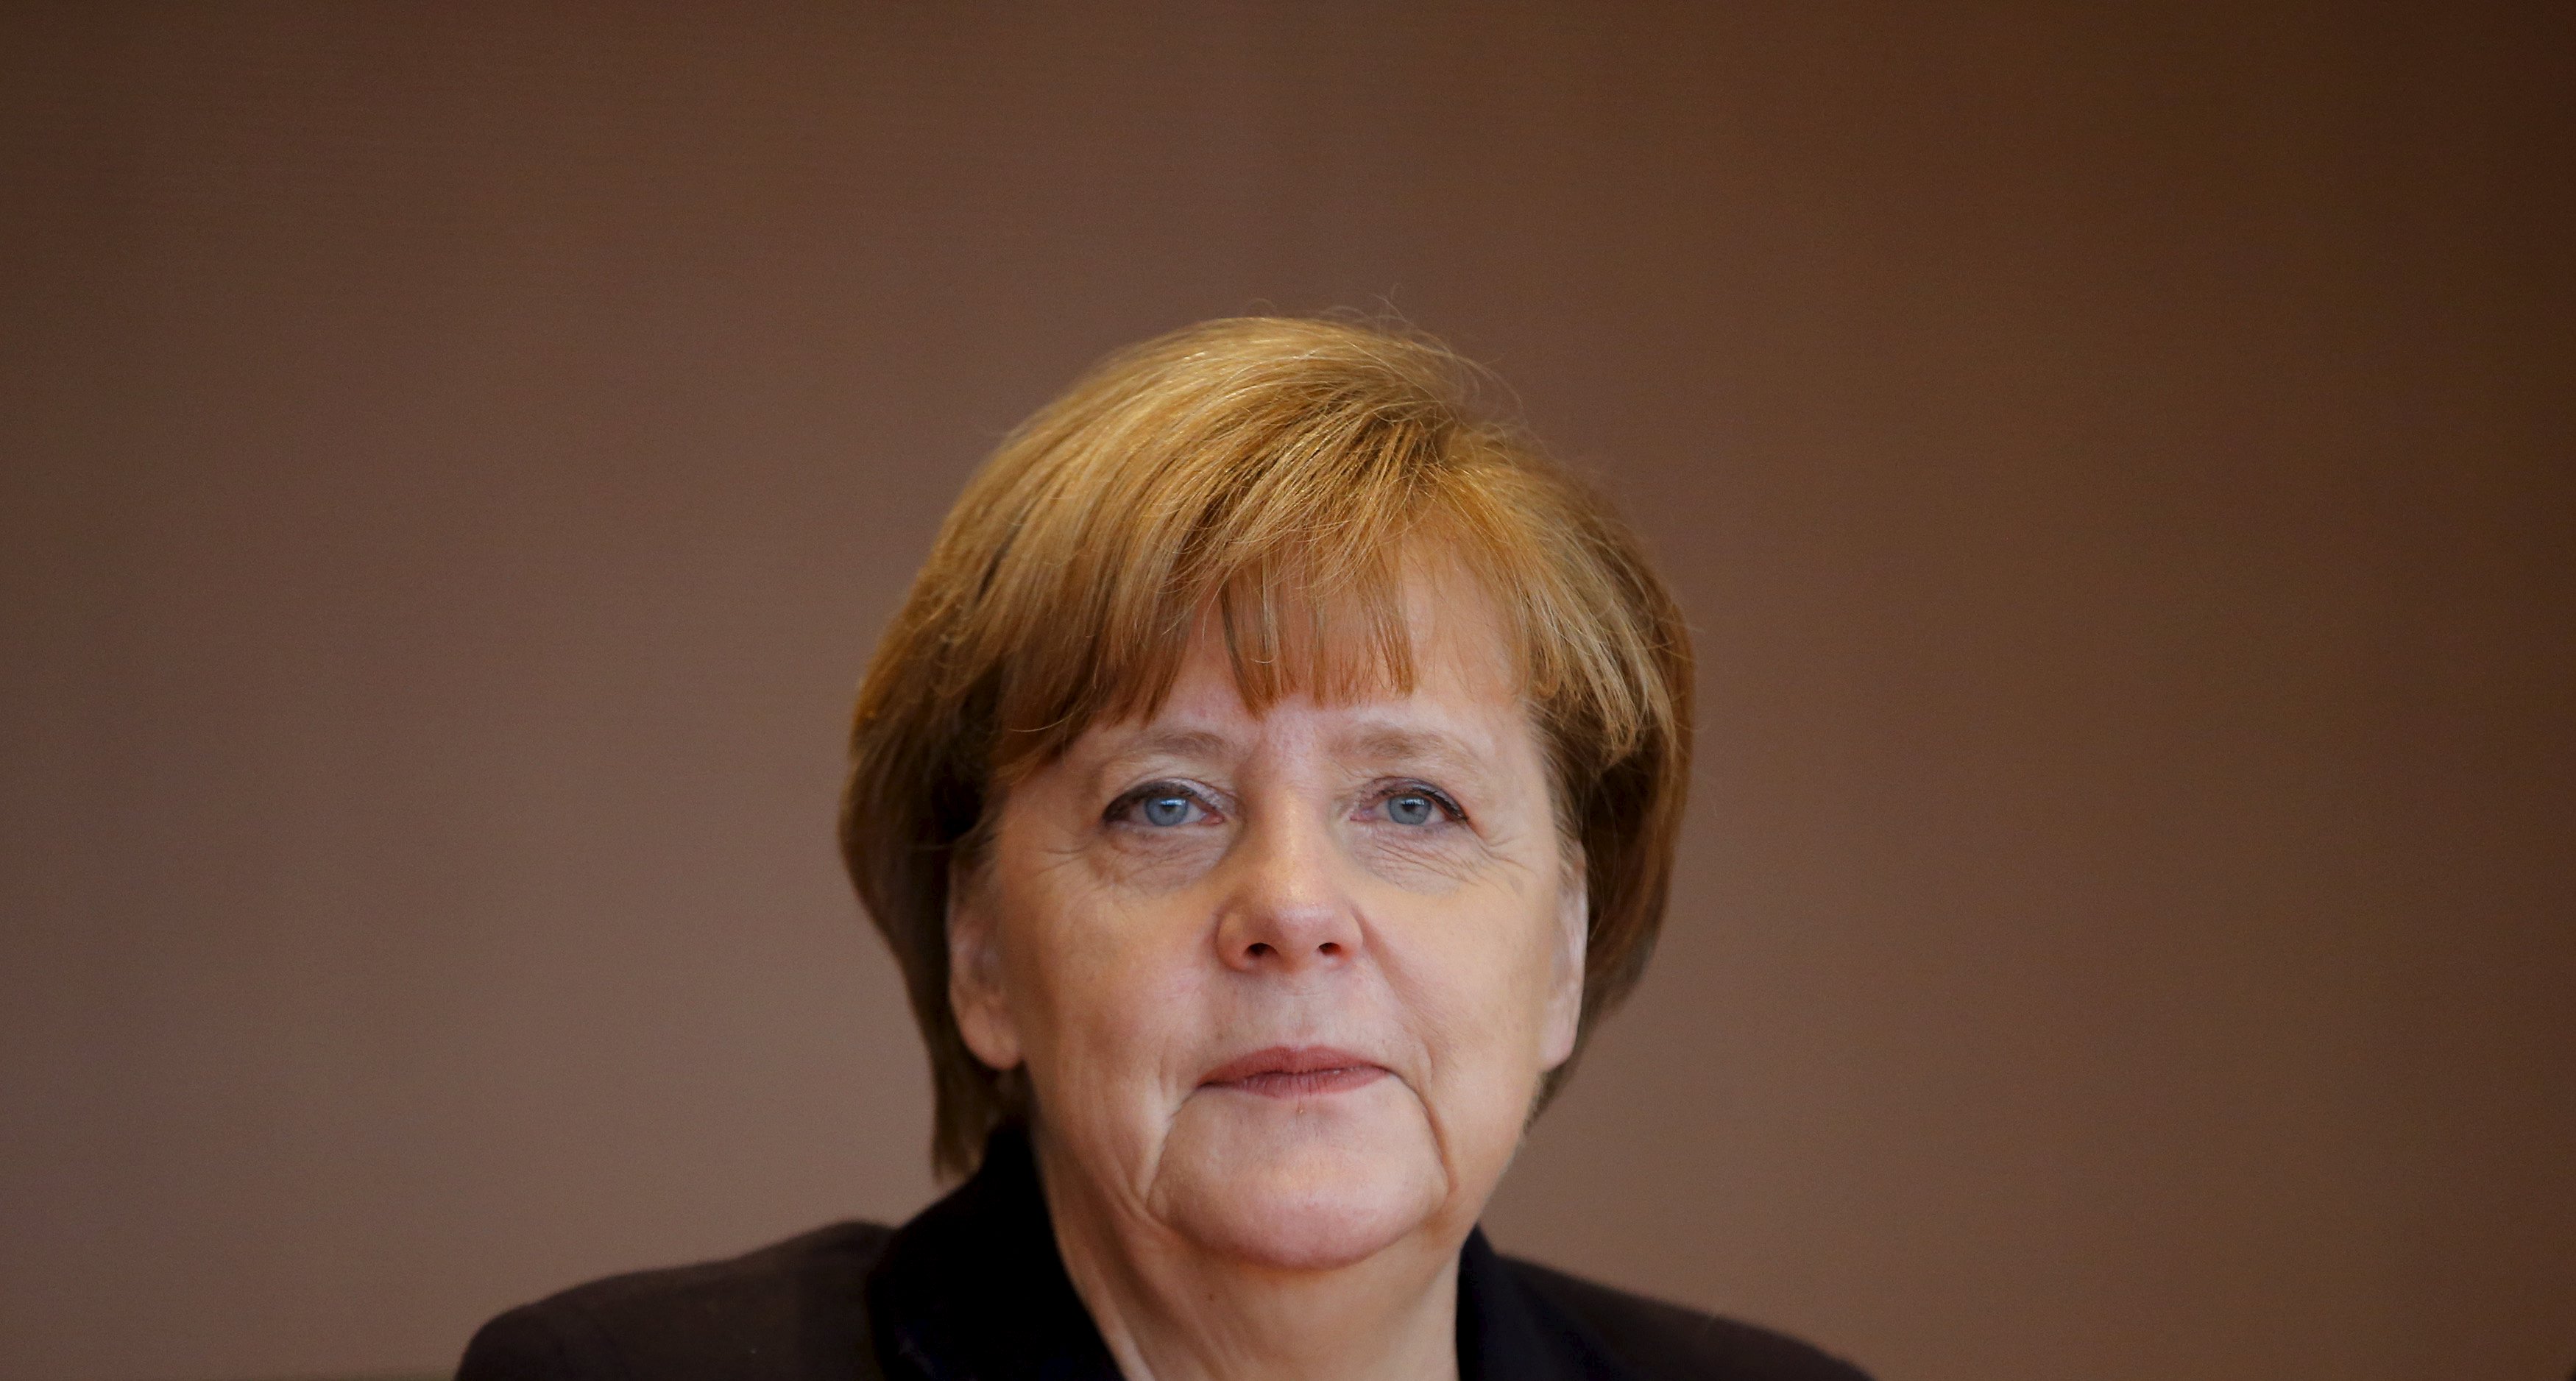 German Chancellor Angela Merkel attends the weekly cabinet meeting at the Chancellery in Berlin, Germany, Dec. 1, 2015